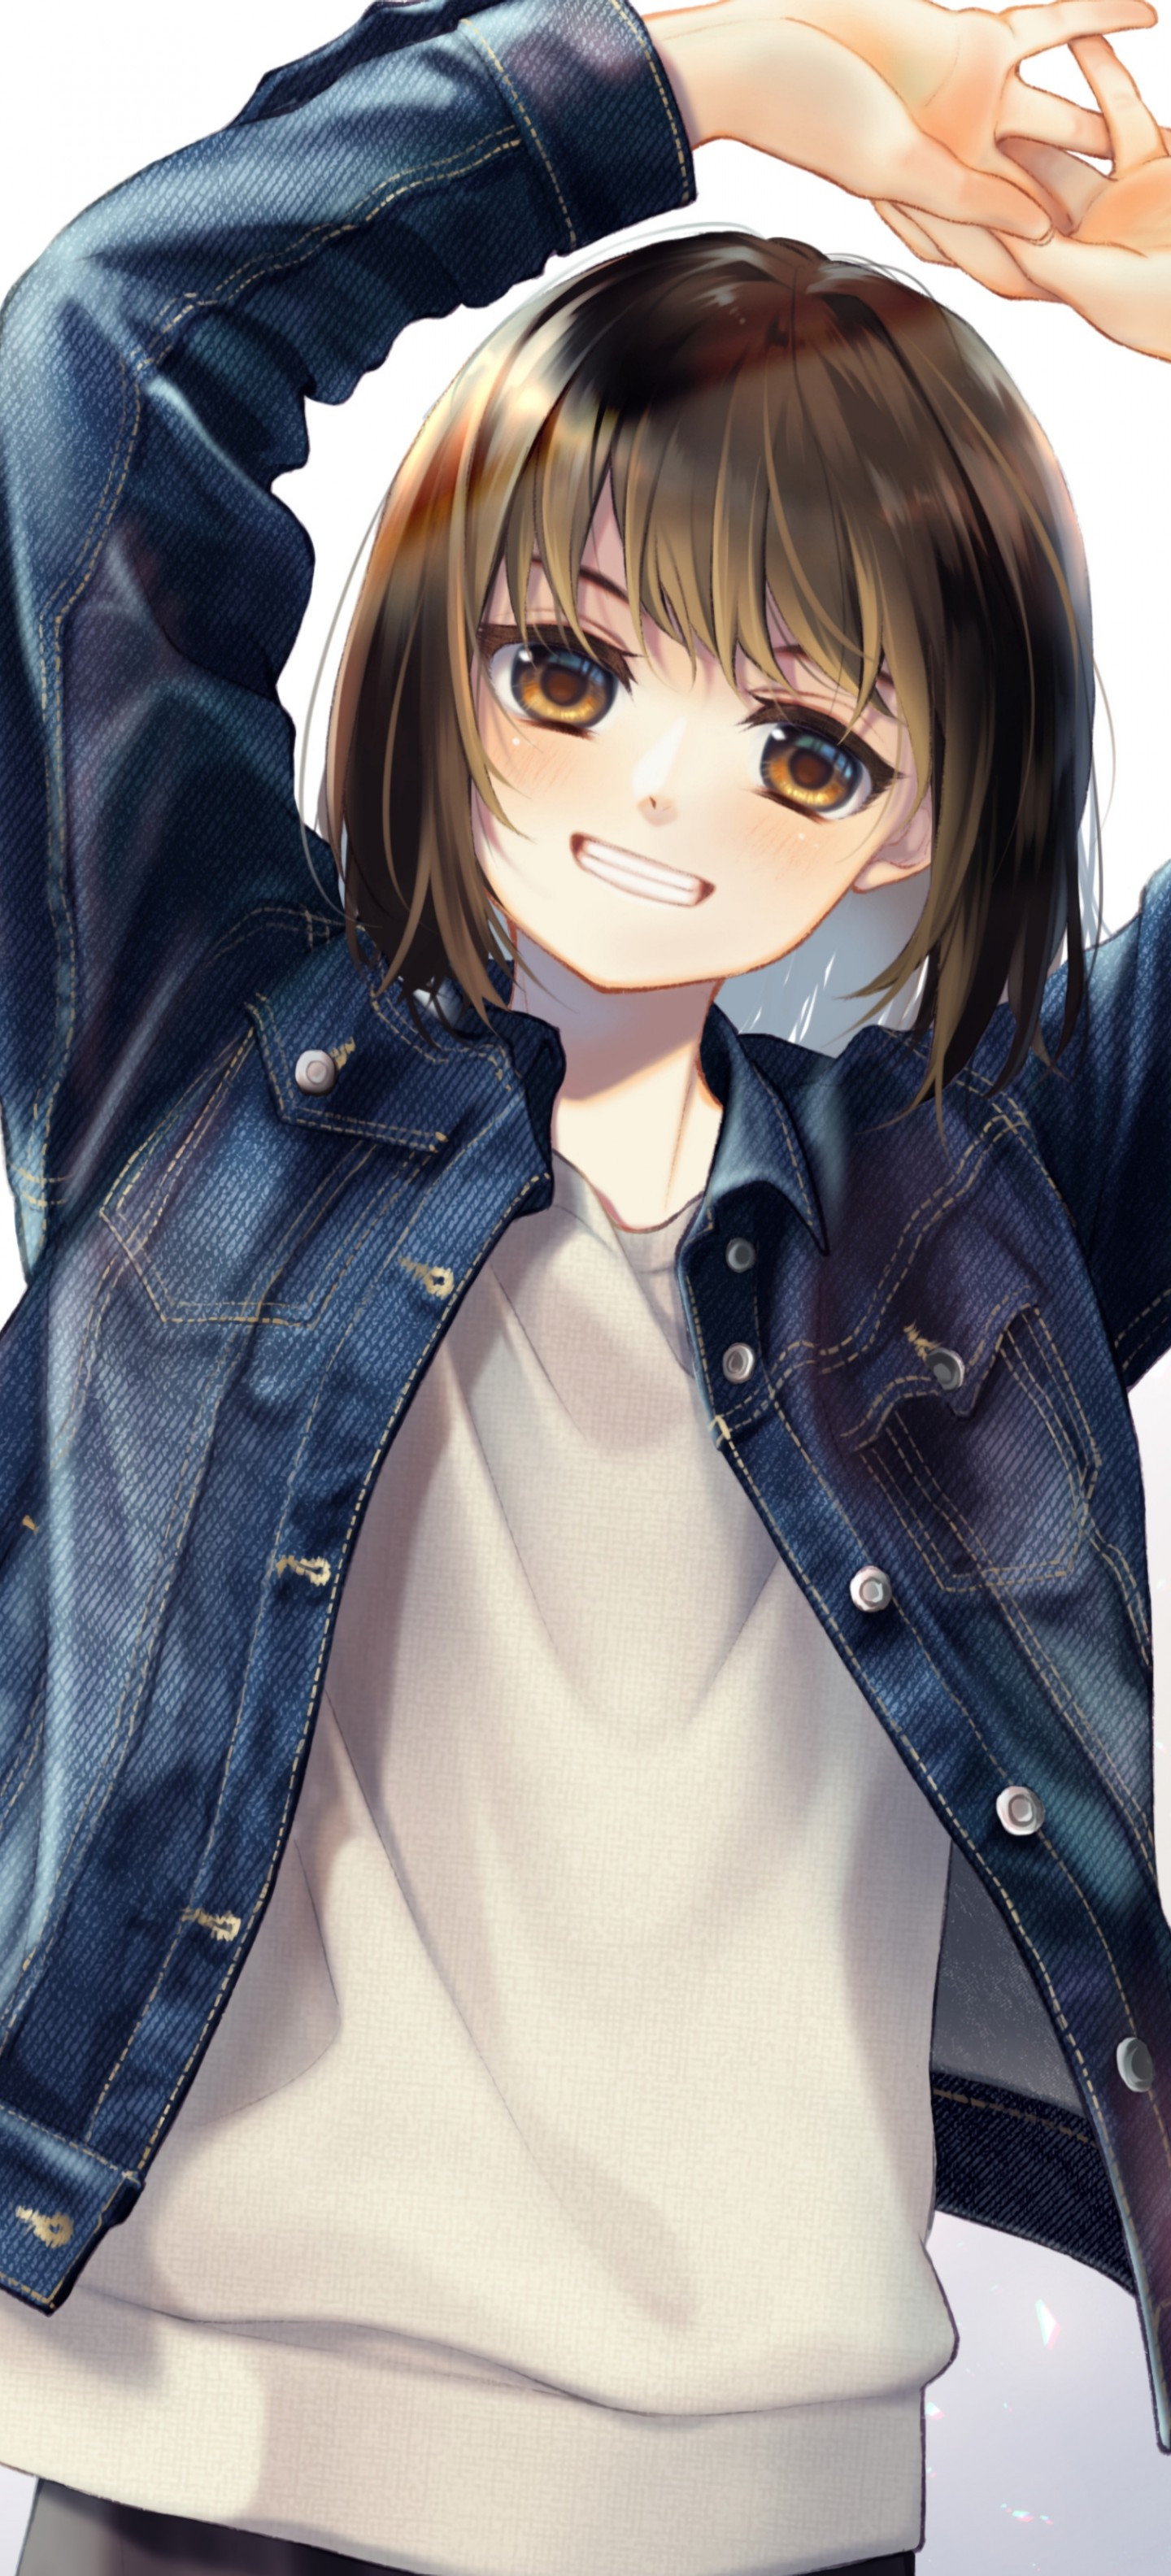 Download 1440x3168 Cute Anime Girl, Short Brown Hair, Big Smile, Jacket Wallpaper for OnePlus 8 Pro, Oppo Find X2